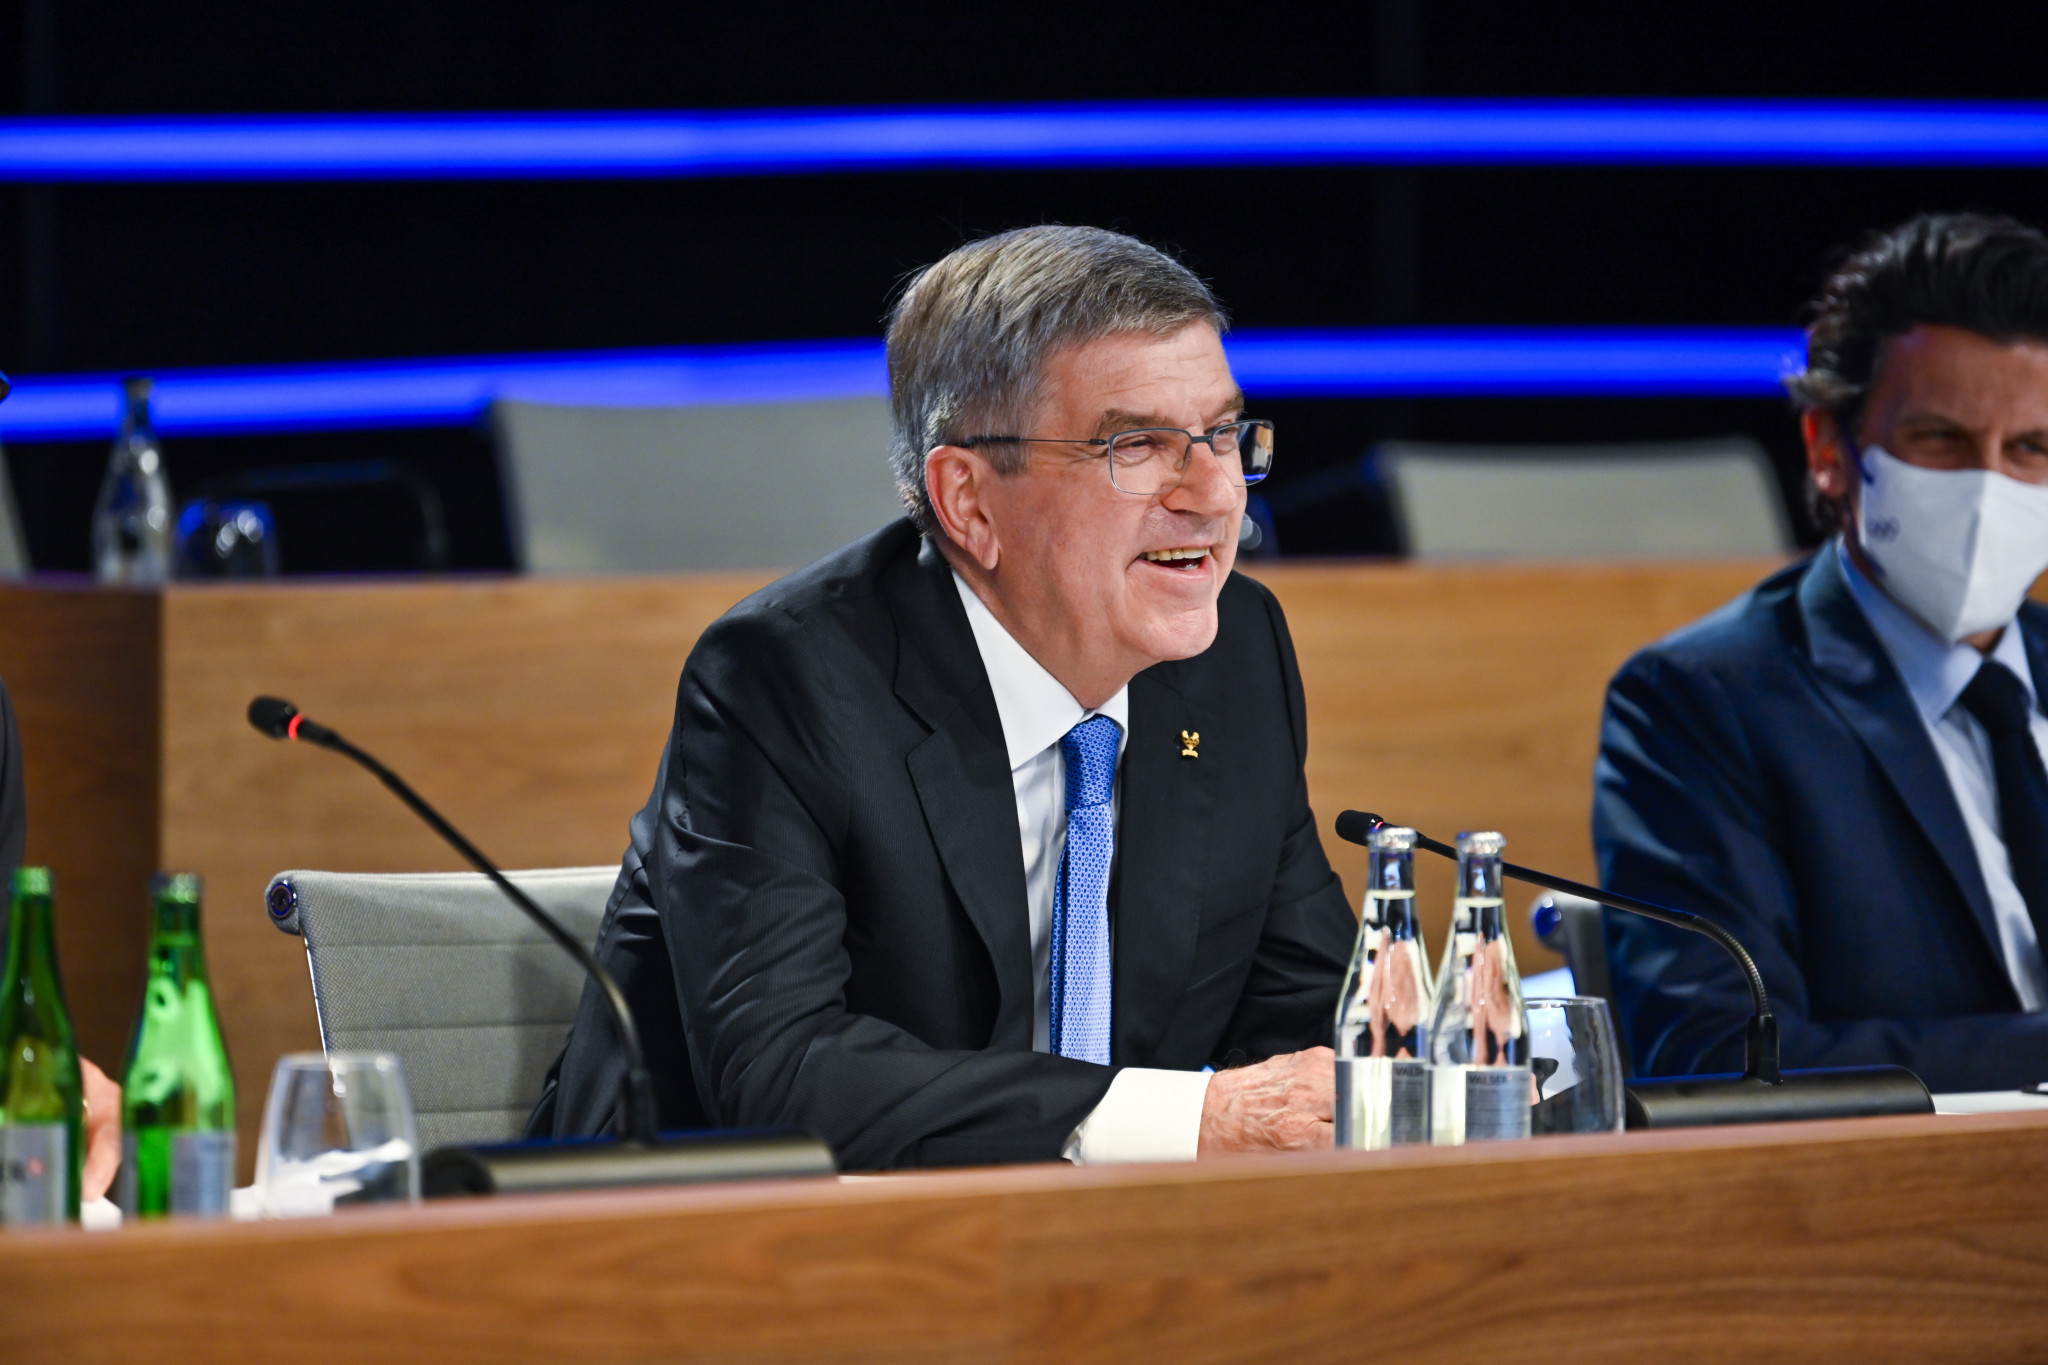 IOC President Thomas Bach expressed hope that the Executive Board can 